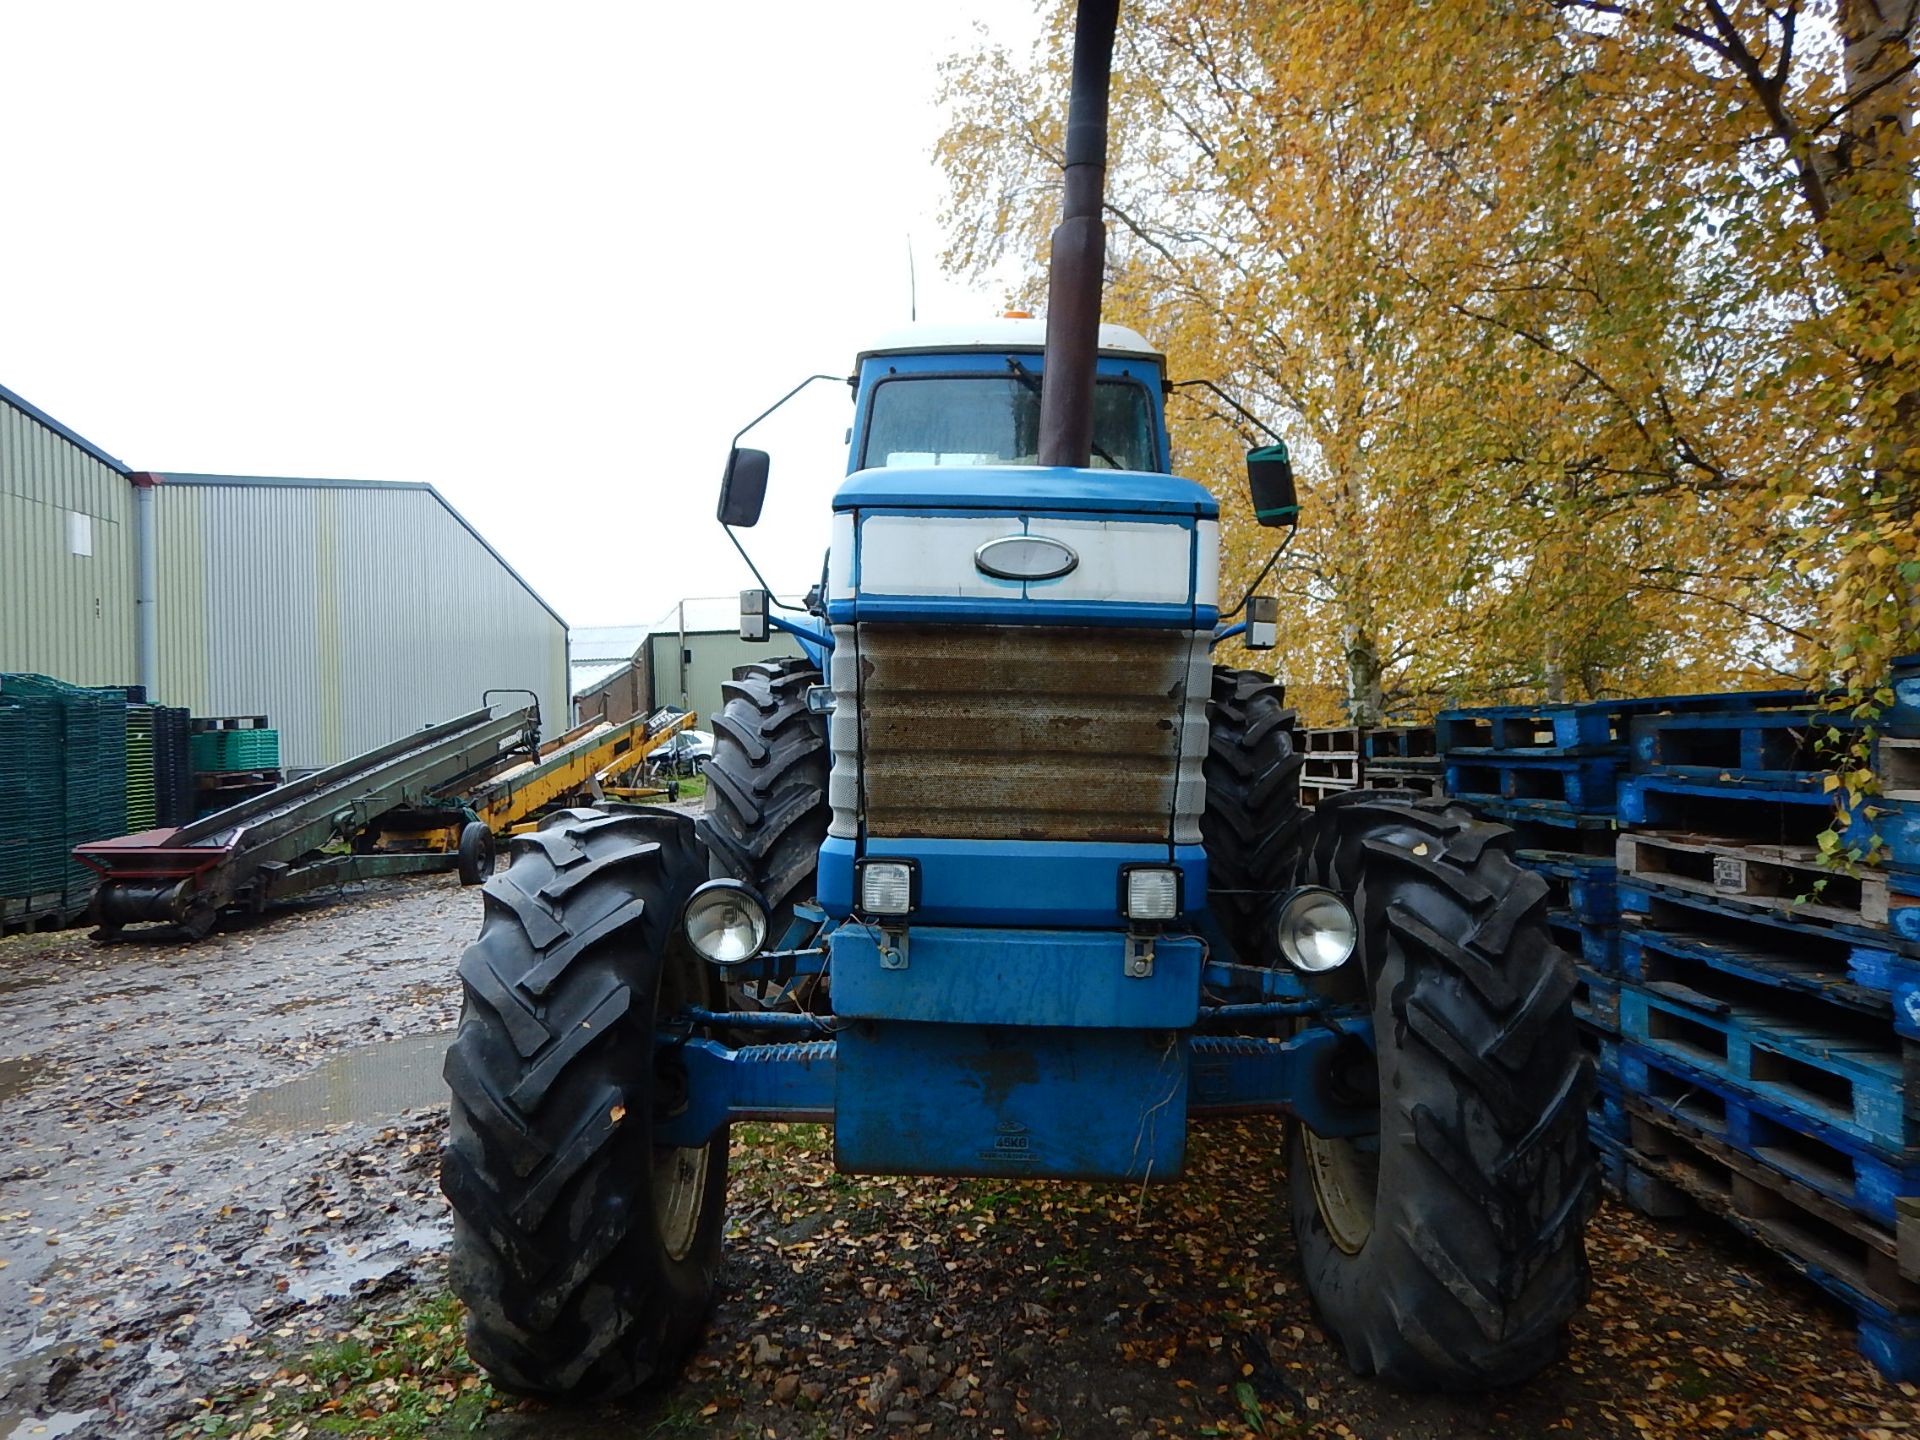 1985 FORD TW-25 4wd TRACTOR Fitted with front underslung weight, rear inside wheel weights, Q cab - Image 2 of 12